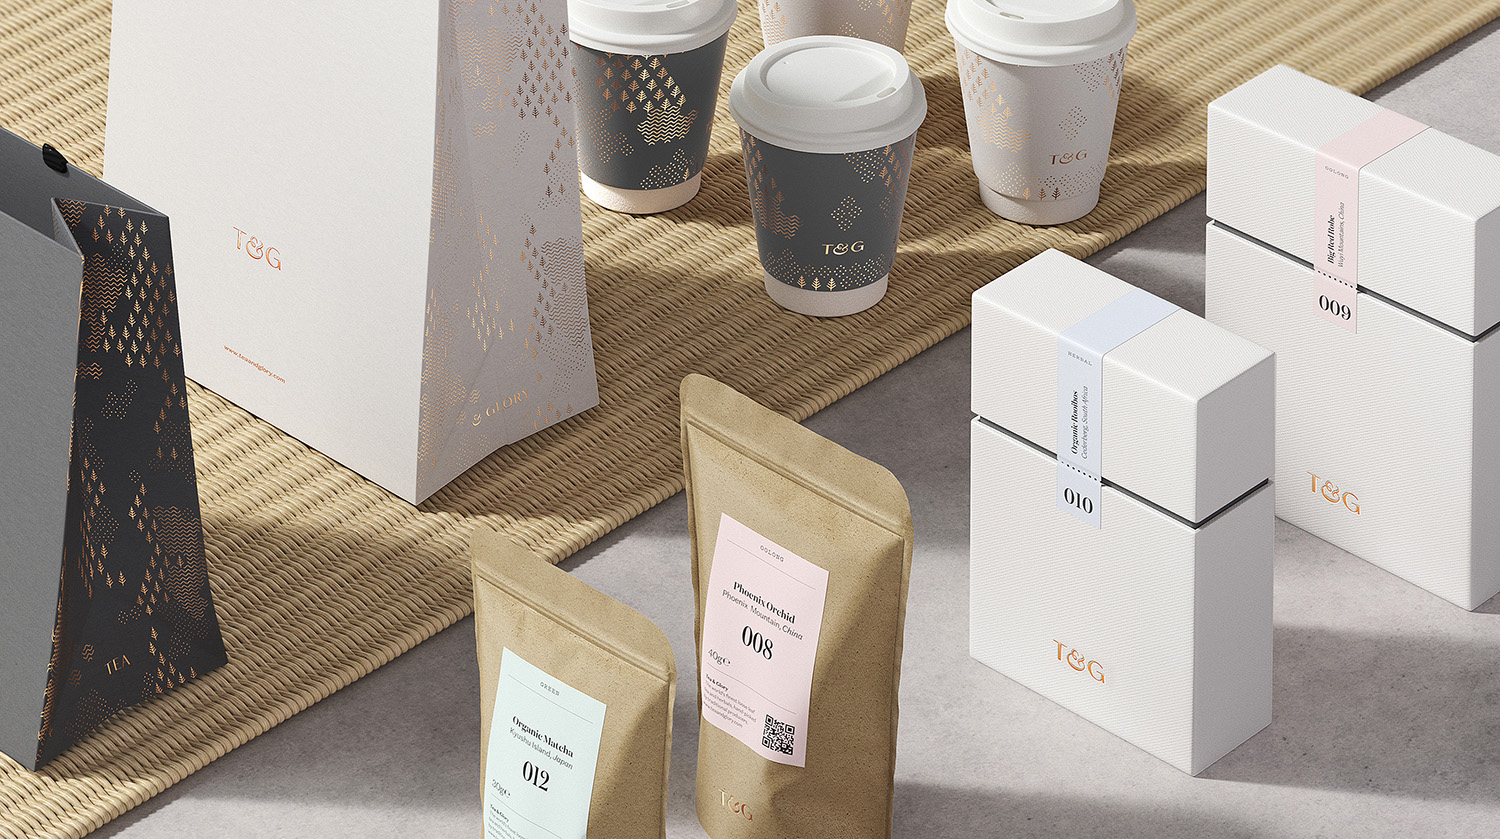 Visual identity, logo, packaging and signage by Socio Design for loose-leaf tea experts Tea and Glory